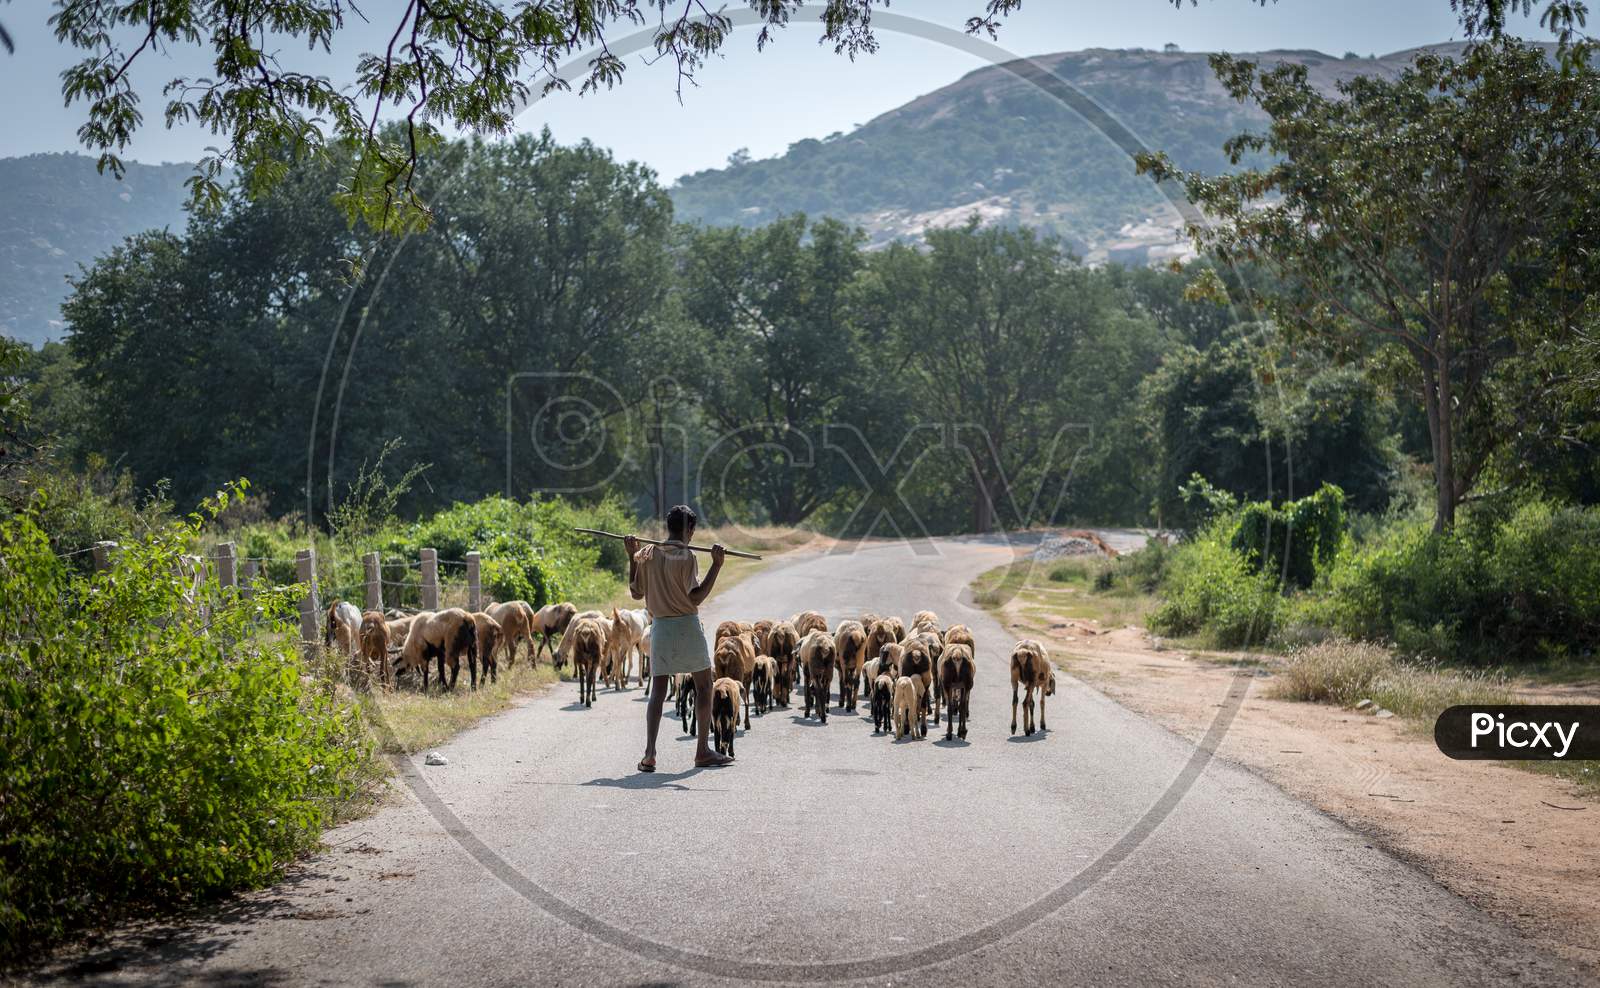 A shepherd in Horsley hills, India with his sheep and goat